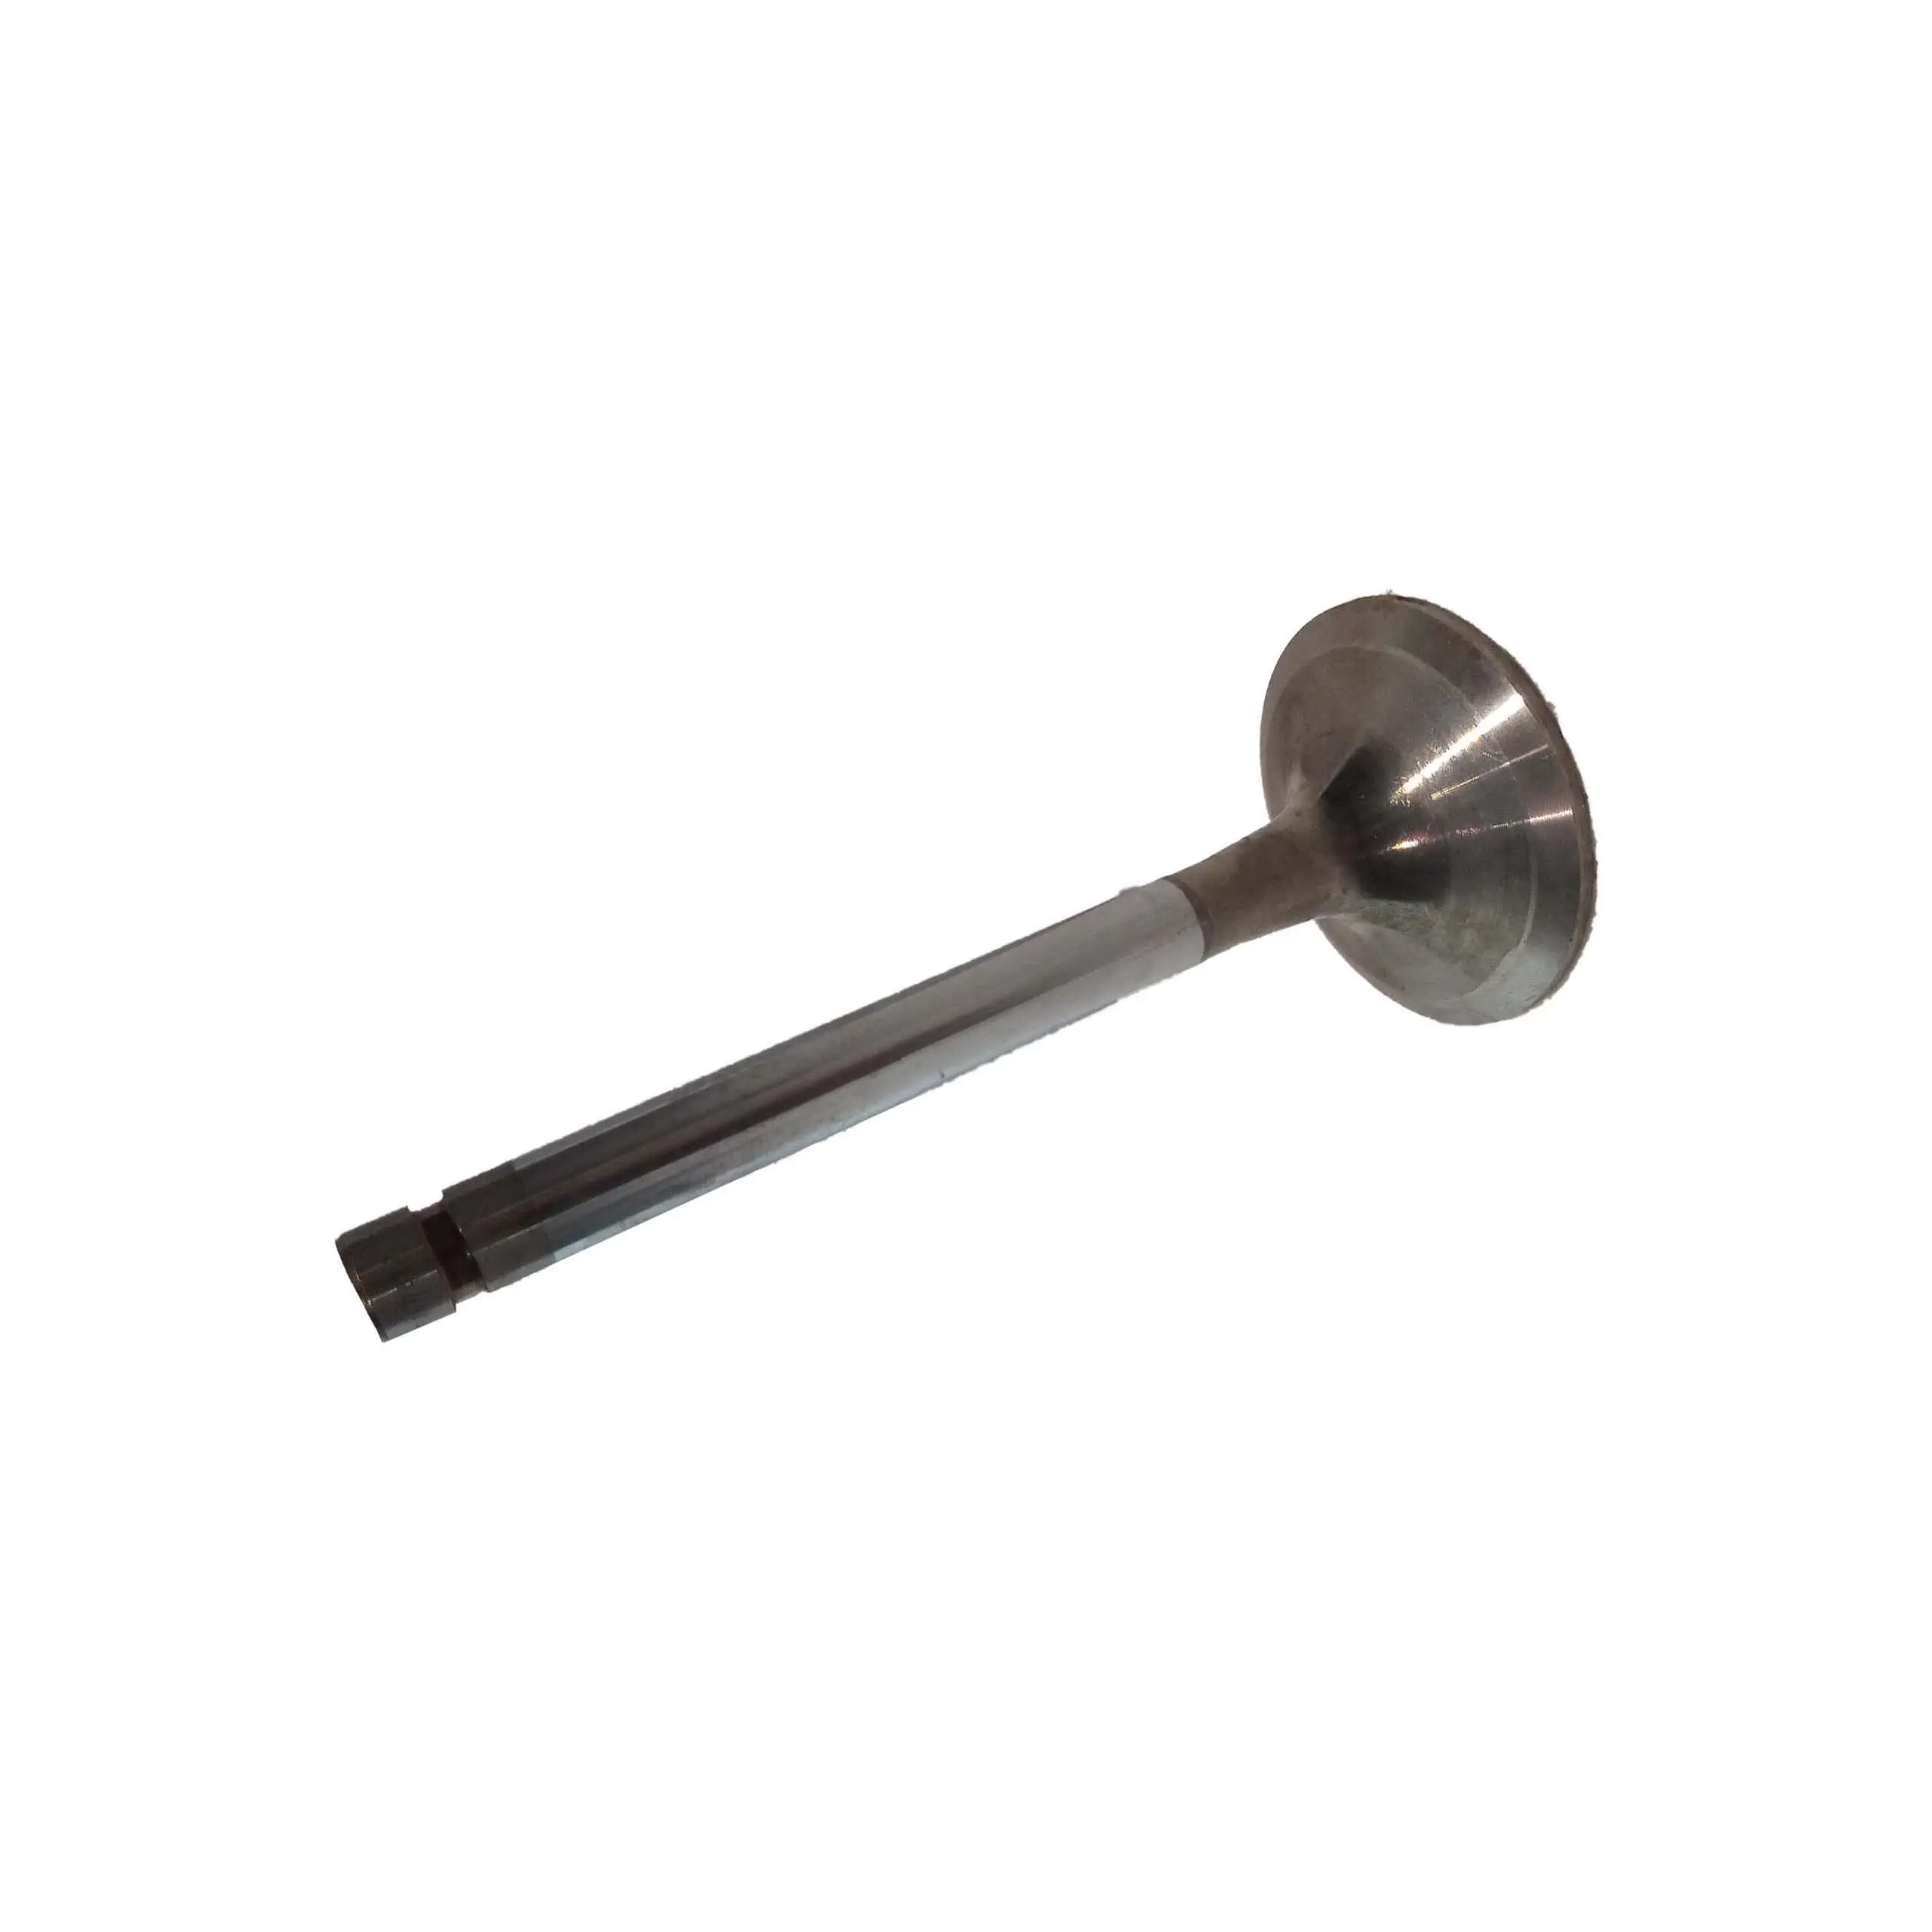 4220530101 TRW Intake Valve. Fits for Mercedees Benzz Truck Bus Diesel Engine Spare Parts of Ball Joint